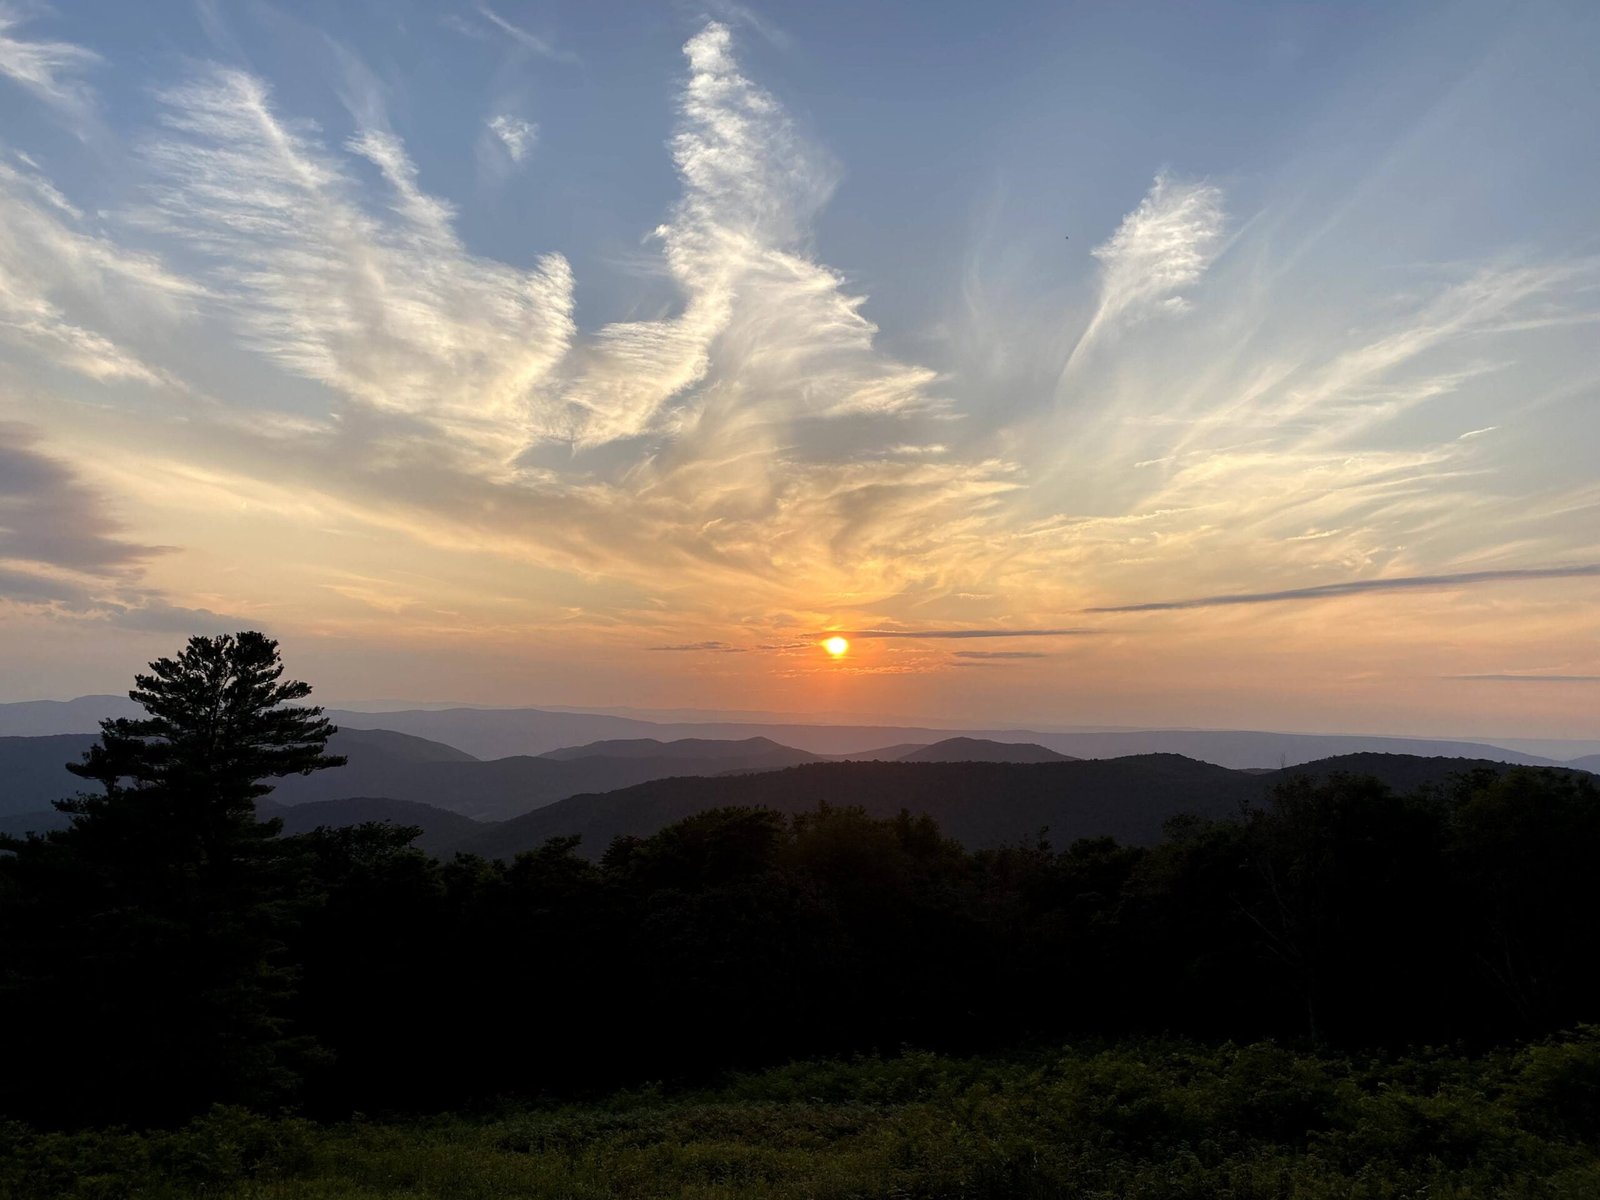 Sunset over the Blue Ridge Mountains